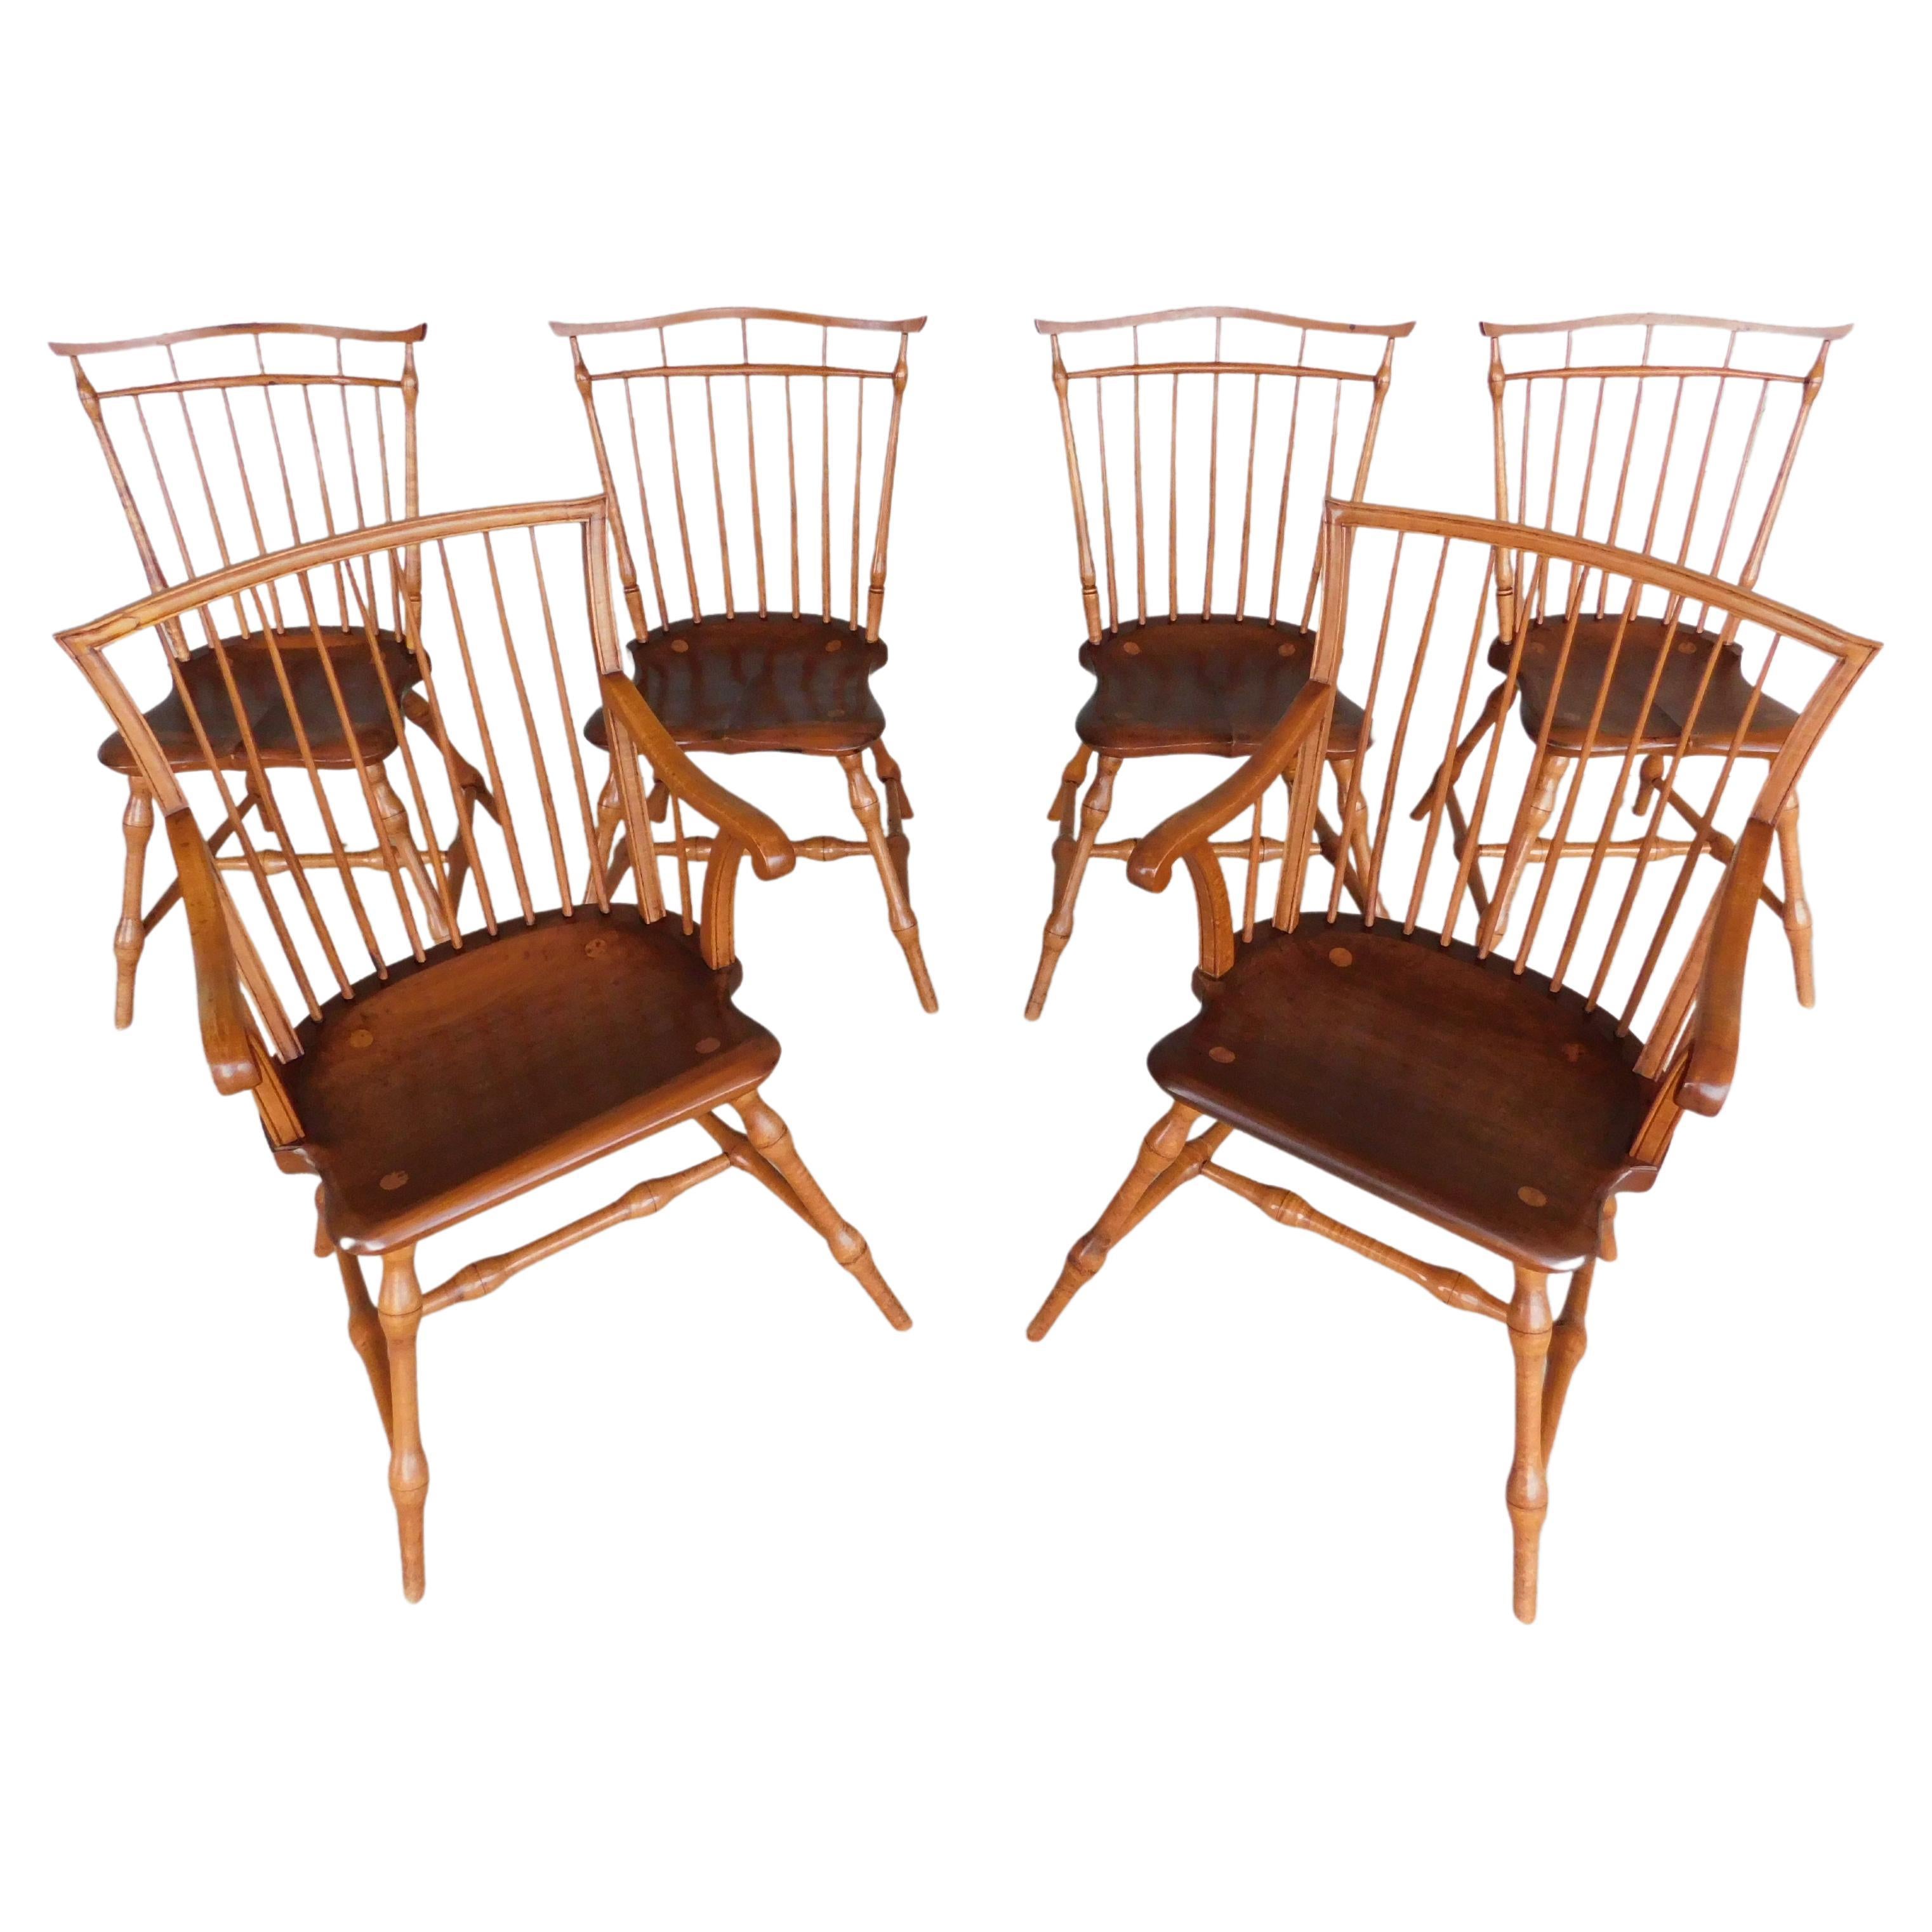 Vintage Bird Cage Windsor Chairs, Set of 6 by Marlow of York Pa